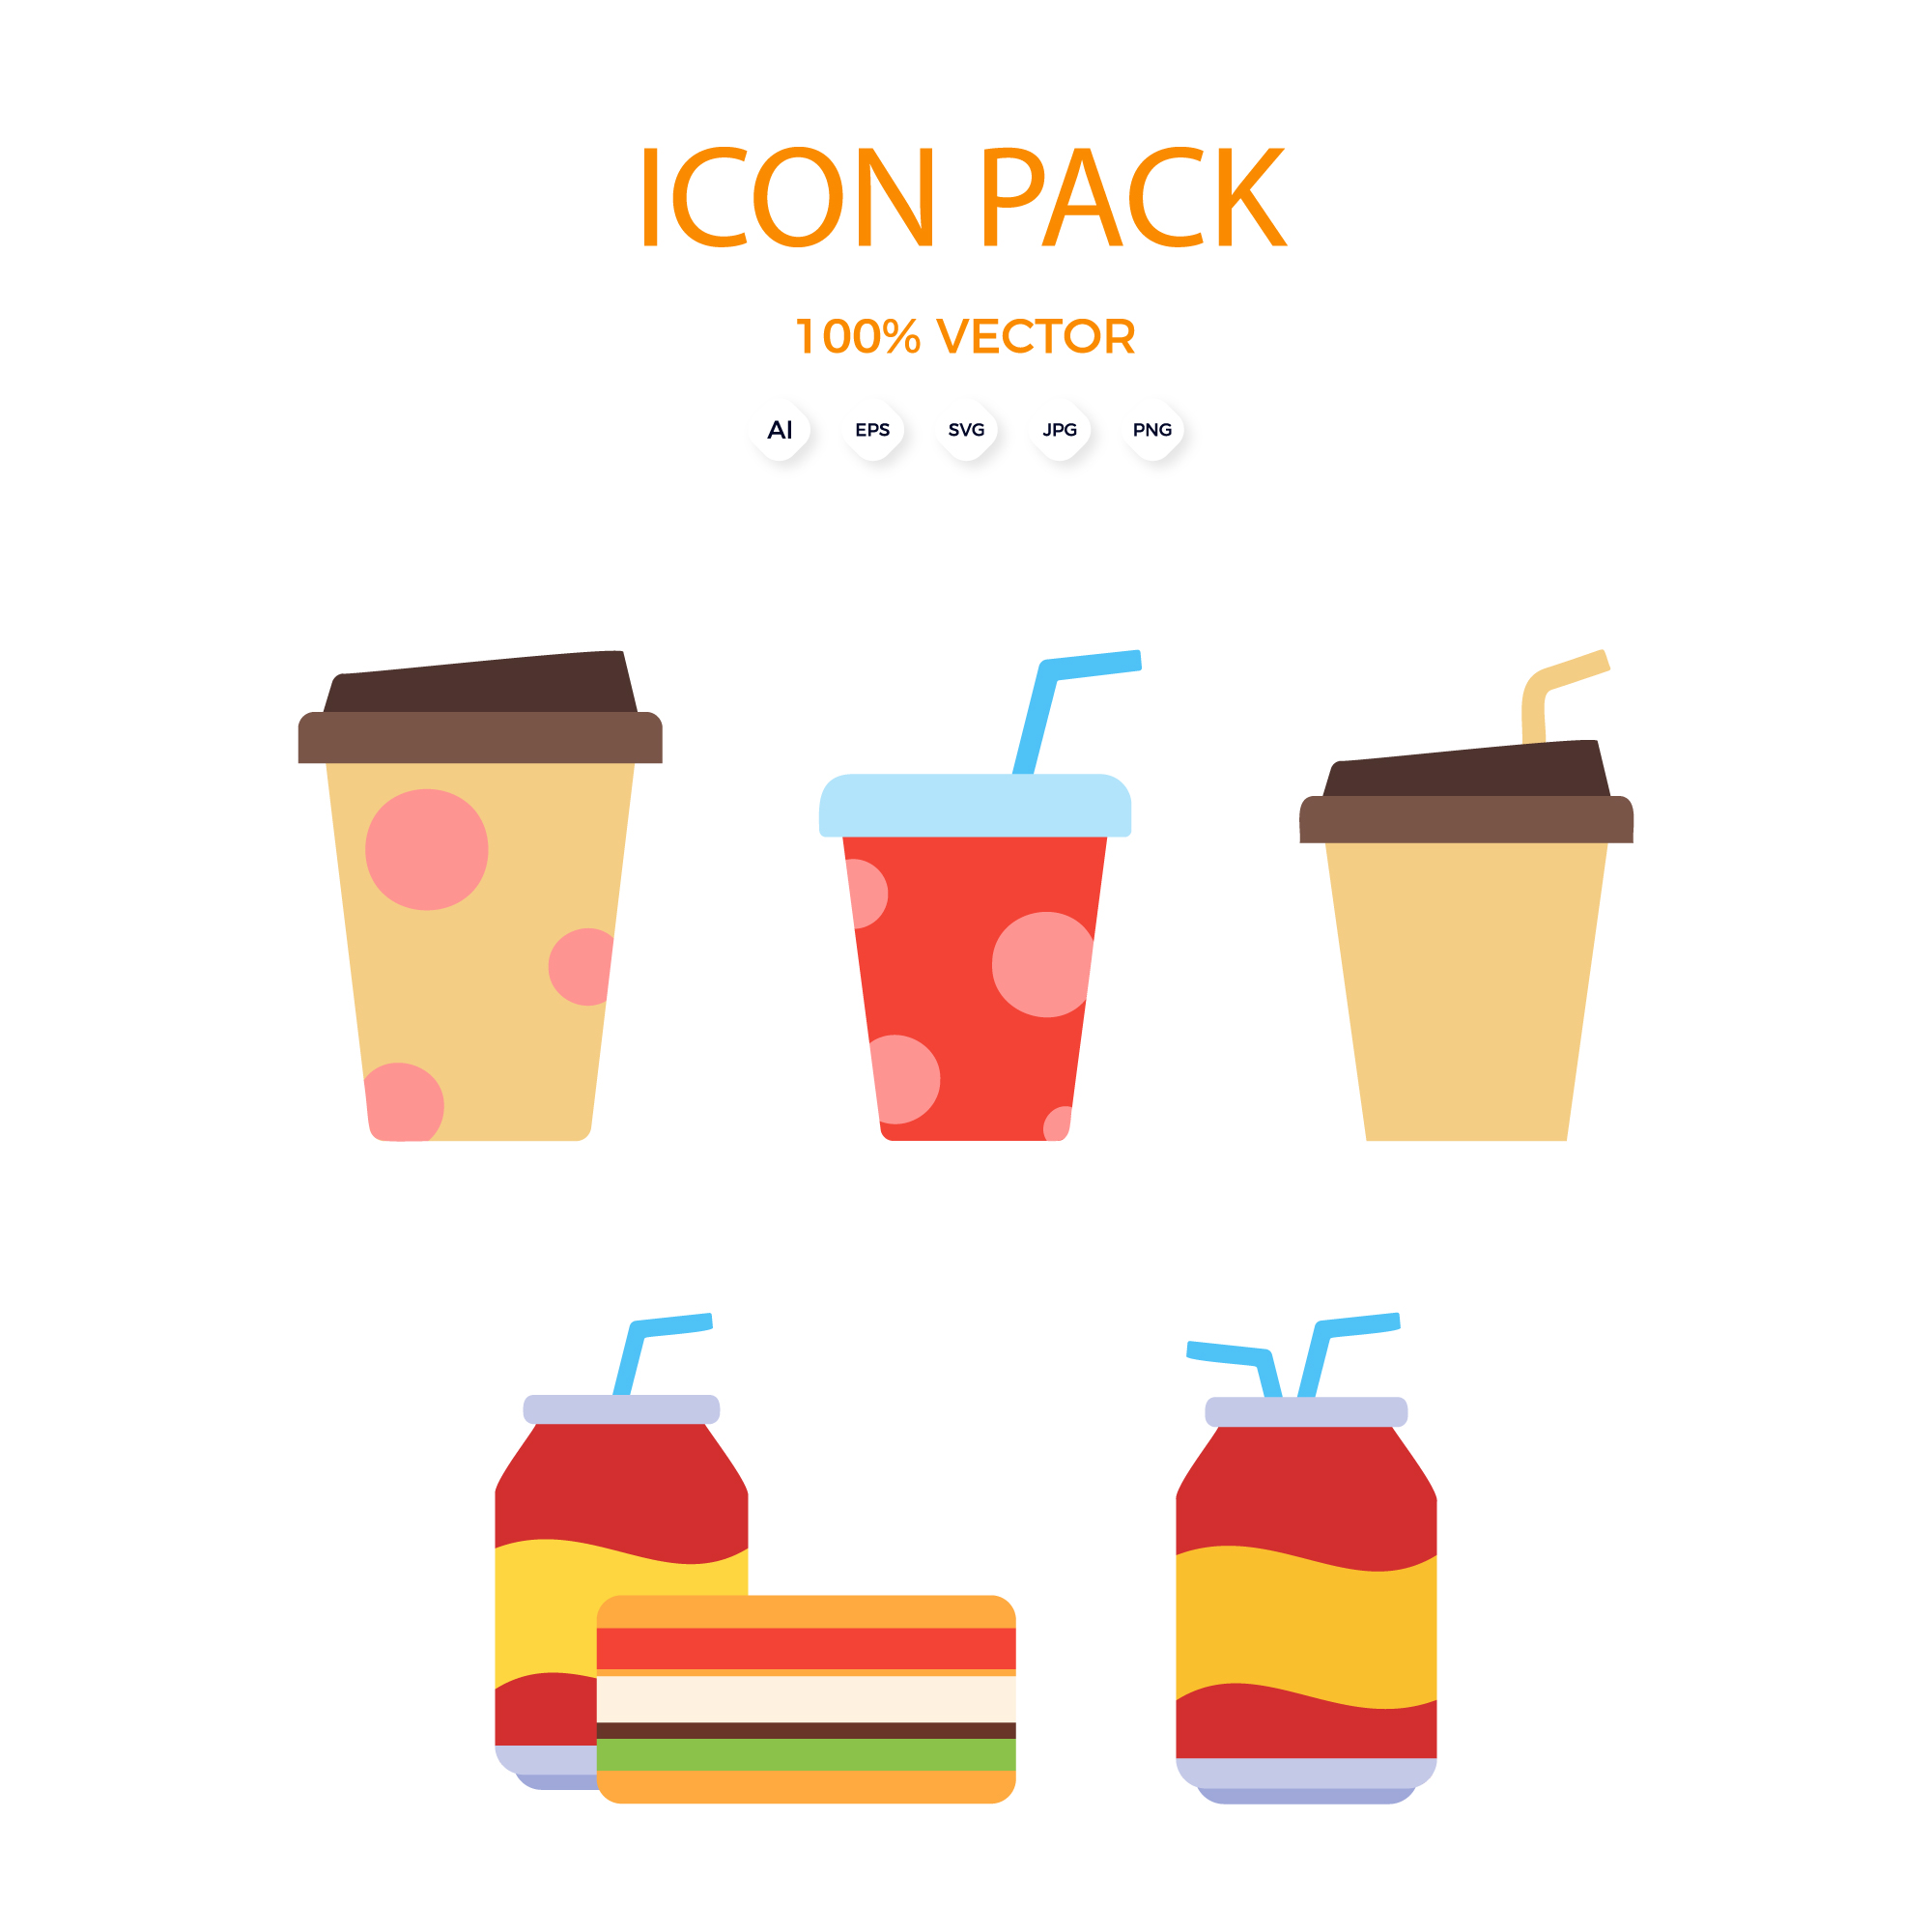 Juice And Food Icon Pack main cover